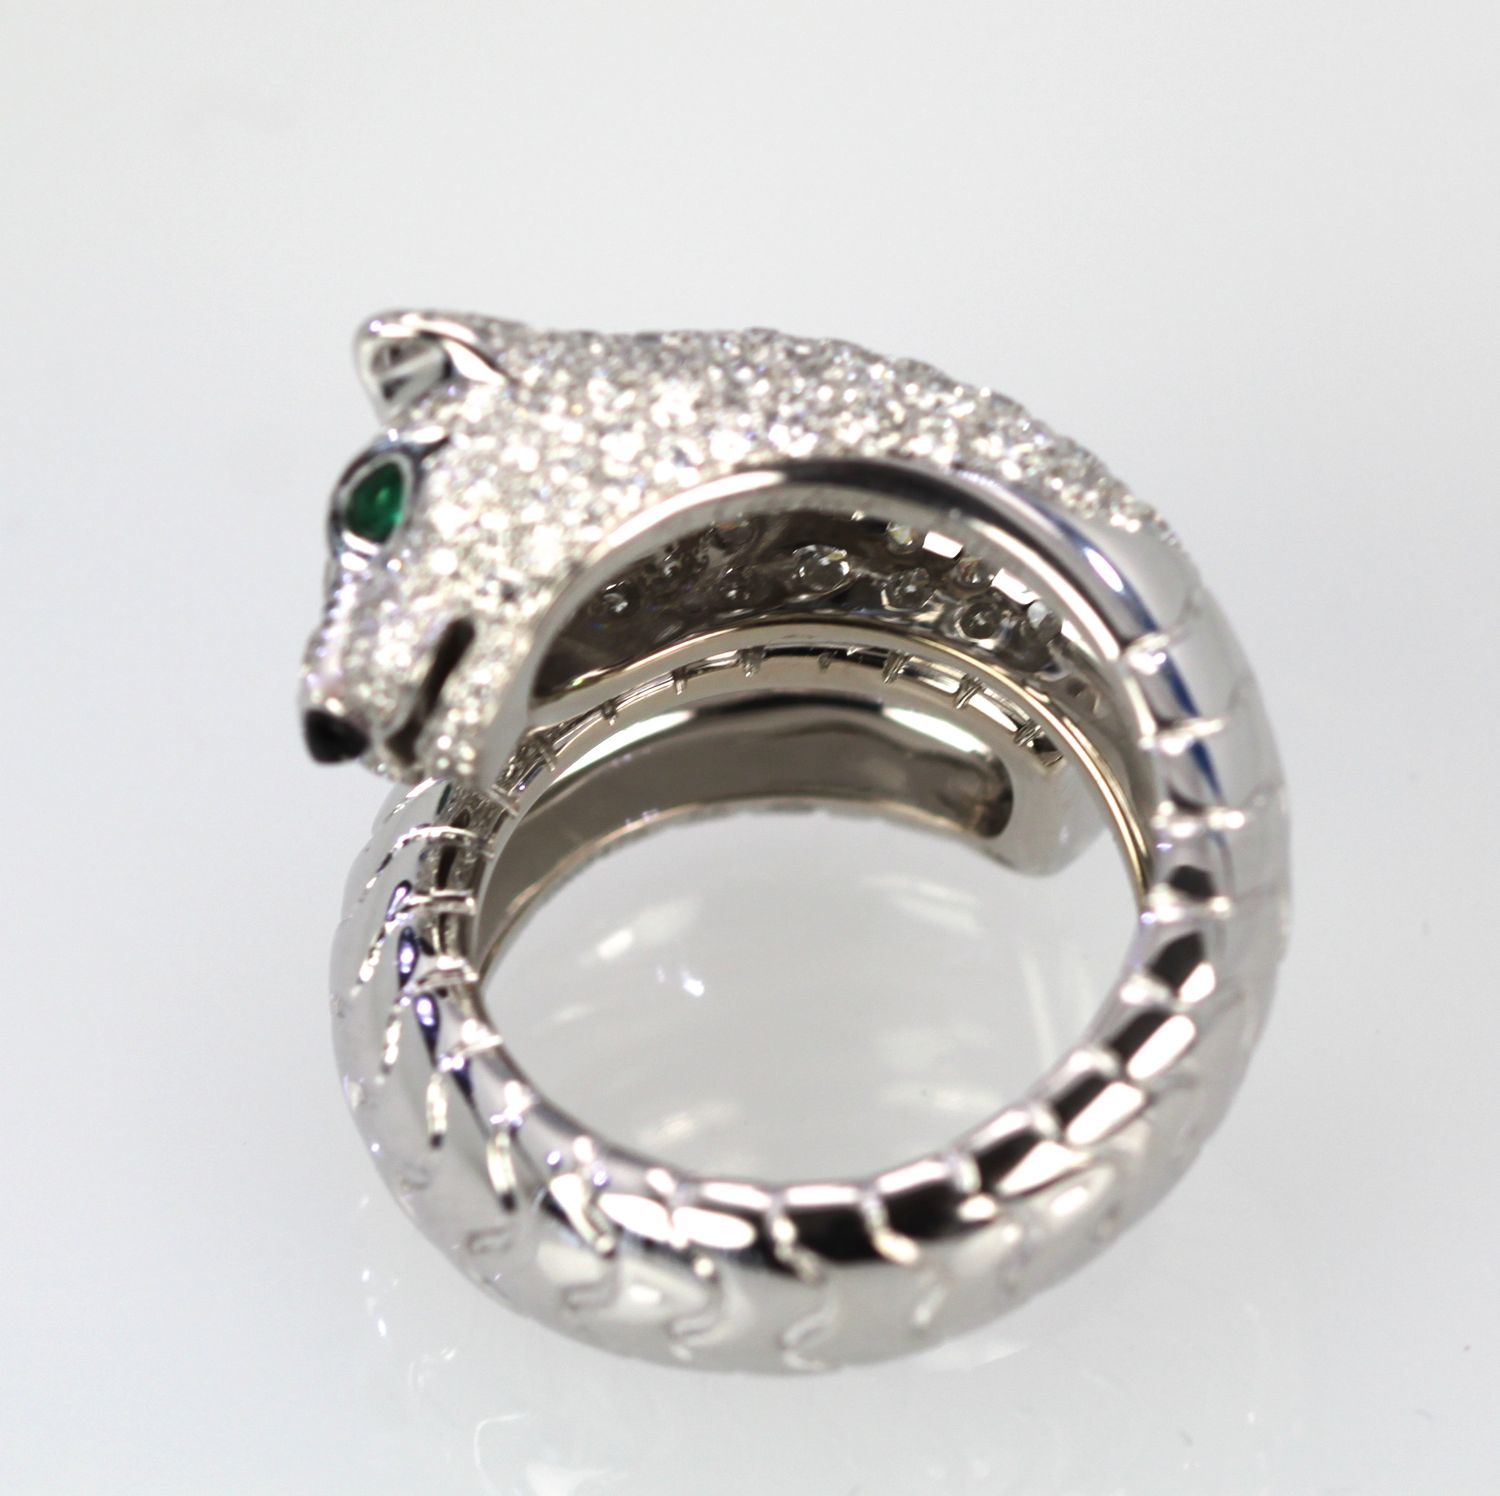 Cartier Panther Diamond Ring from the Panthere de Cartier Collection